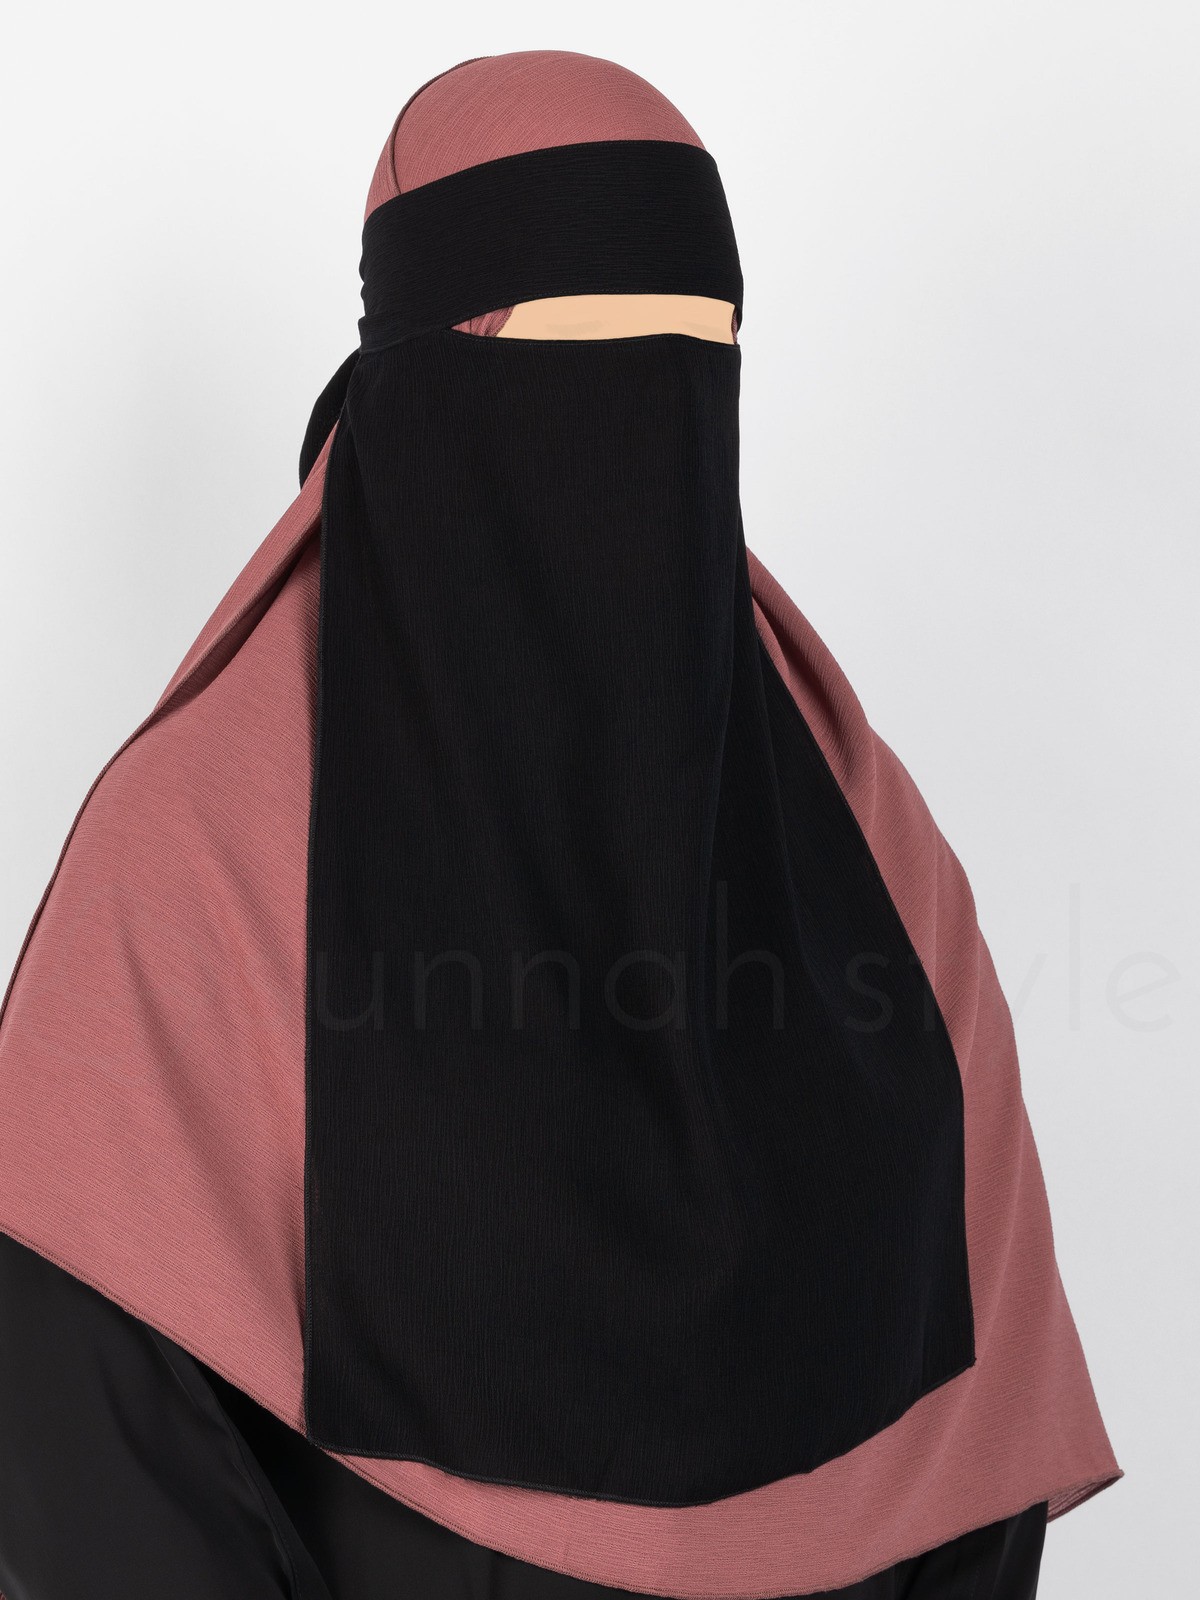 Sunnah Style - Brushed One Layer Niqab (Black)